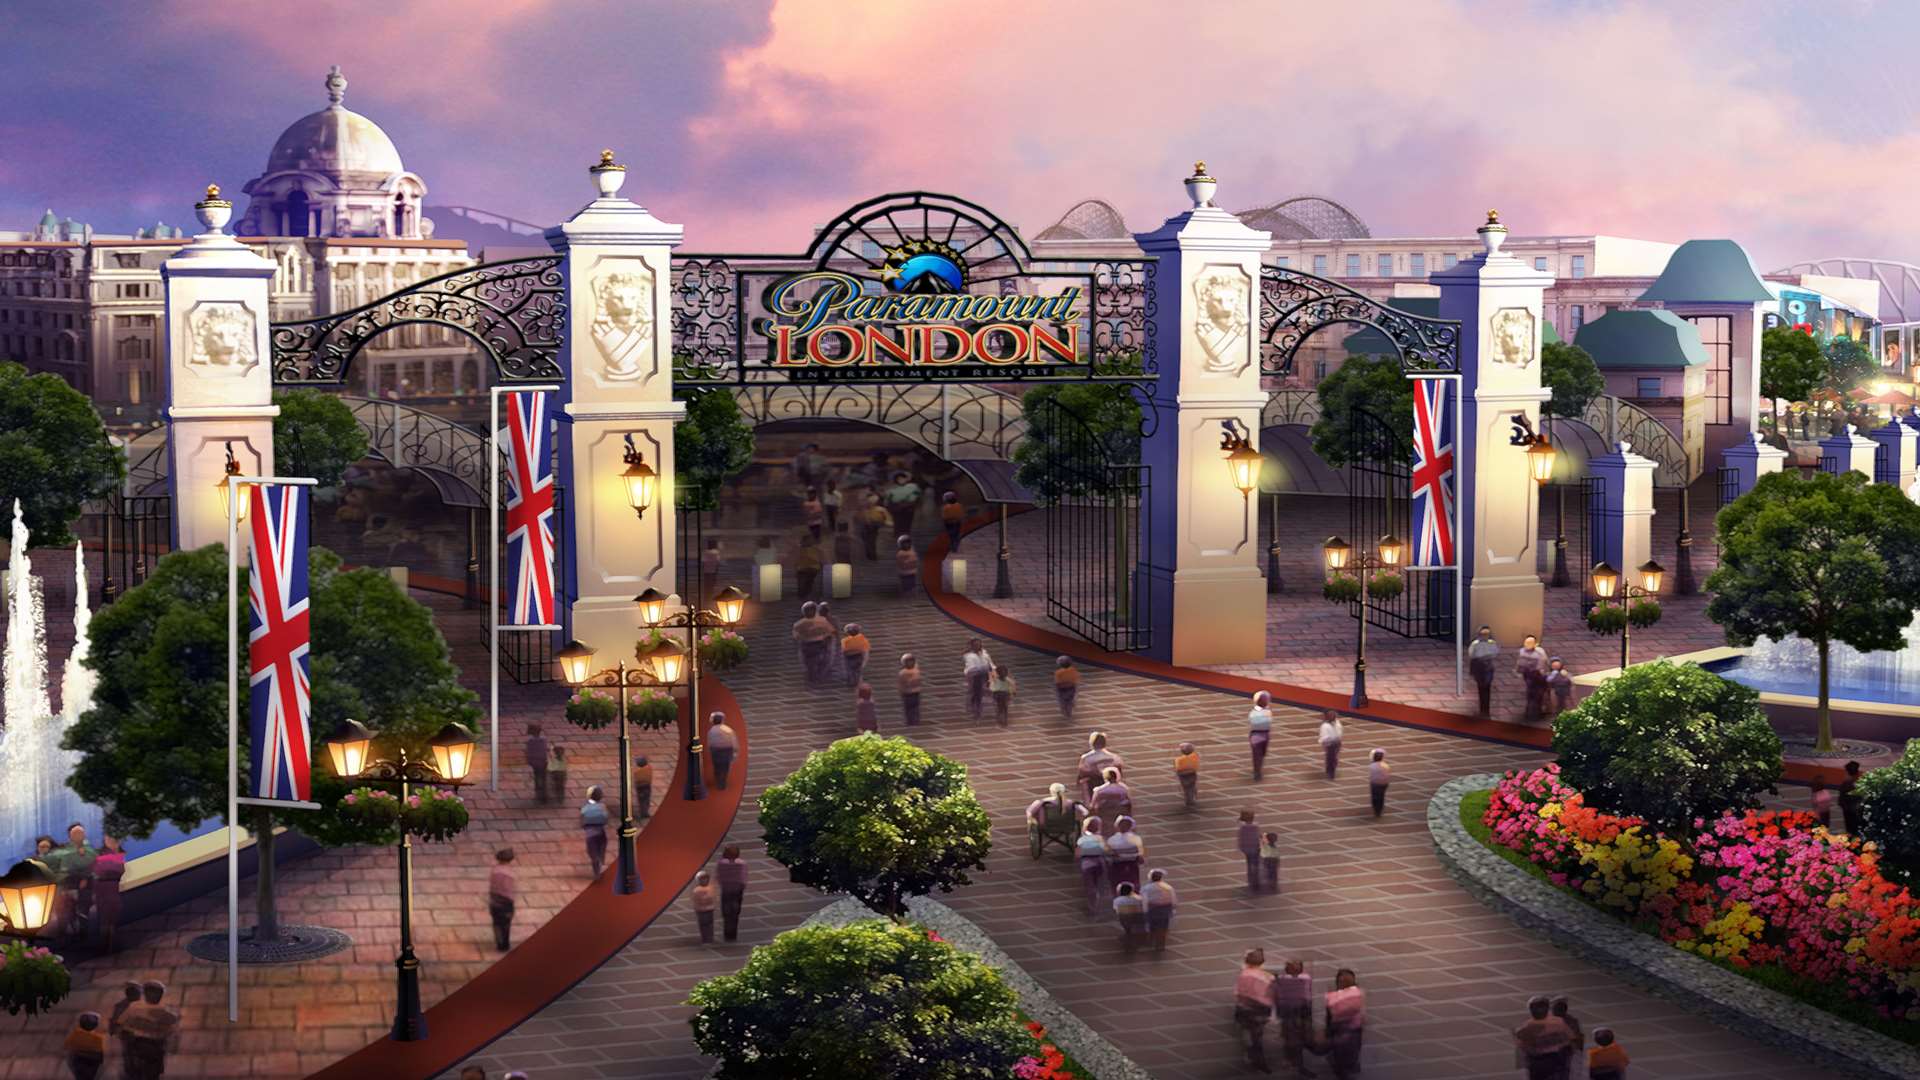 The giant theme park is now scheduled to open in 2023